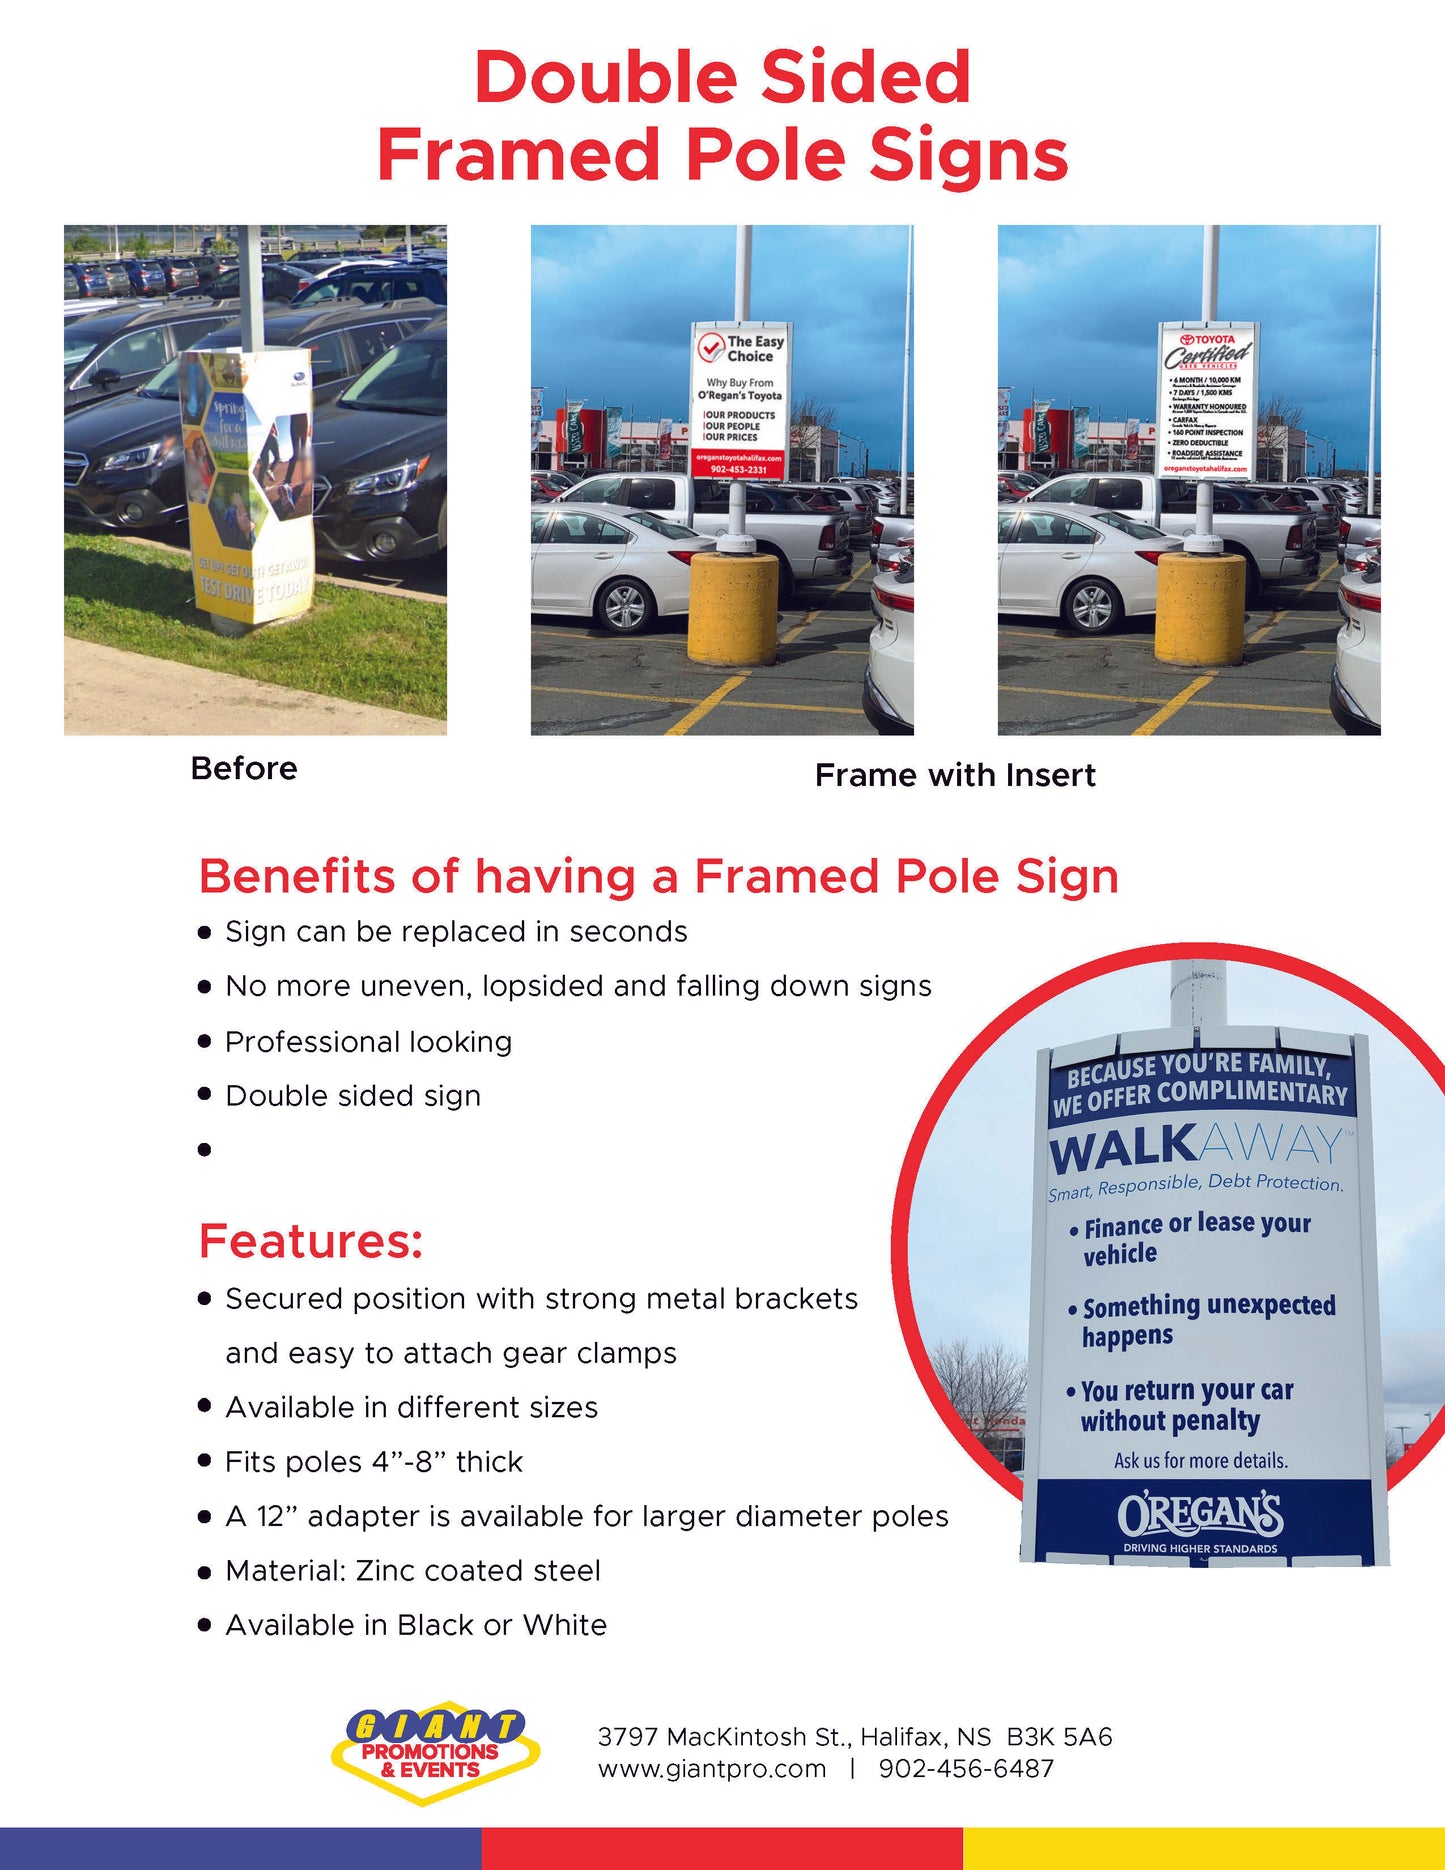 Double Sided Pole Signs